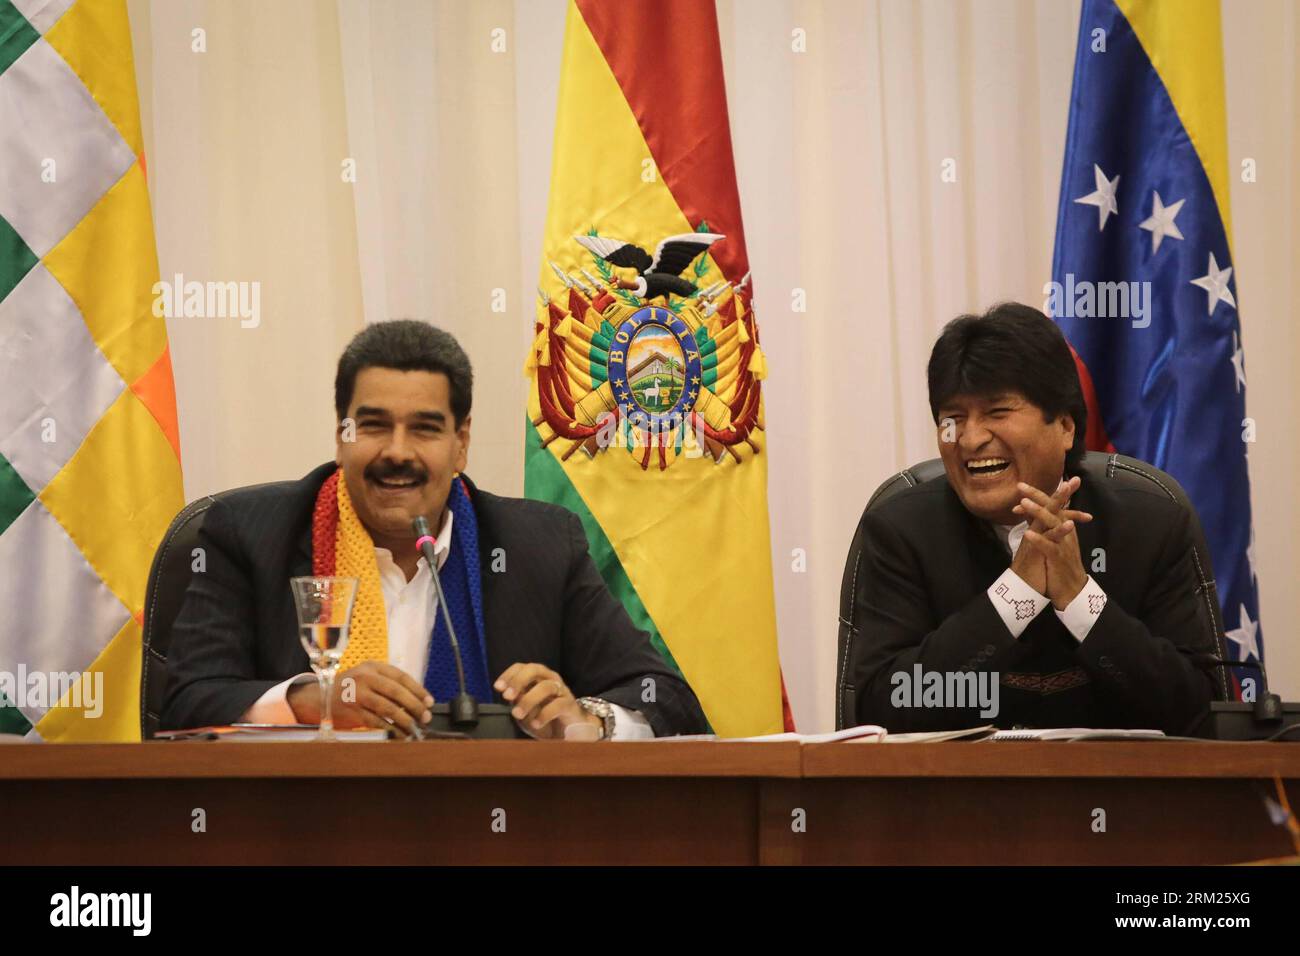 Bildnummer: 59703739  Datum: 25.05.2013  Copyright: imago/Xinhua Photo provided by Venezuela s Presidency shows Bolivian President Evo Morales (R) and Venezuelan President Nicolas Maduro attending the second meeting of the Bolivia-Venezuela Joint Integration Commission, in Cochabamba City, Bolivia, on May 25, 2013. (Xinhua/Venezuelas Presidency) BOLIVIA-COCHABAMBA-VENEZUELA-POLITICS-MEETING PUBLICATIONxNOTxINxCHN People Politik premiumd x0x xsk 2013 quer     59703739 Date 25 05 2013 Copyright Imago XINHUA Photo provided by Venezuela S Presidency Shows Bolivian President Evo Morales r and Venez Stock Photo